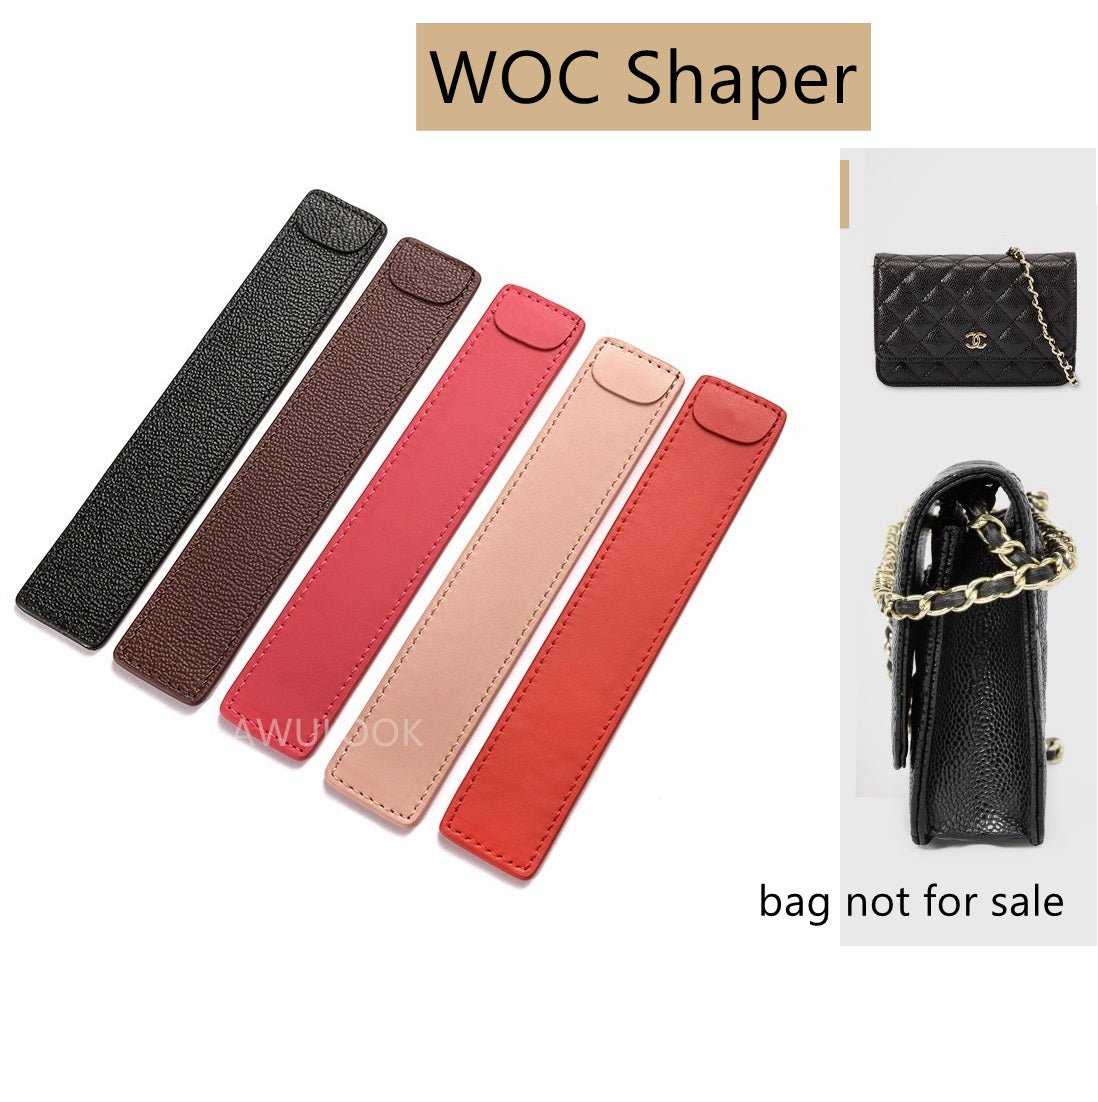 Leather Shaper for WOC/CF/Le boy, Bag Base Insert - Awulook